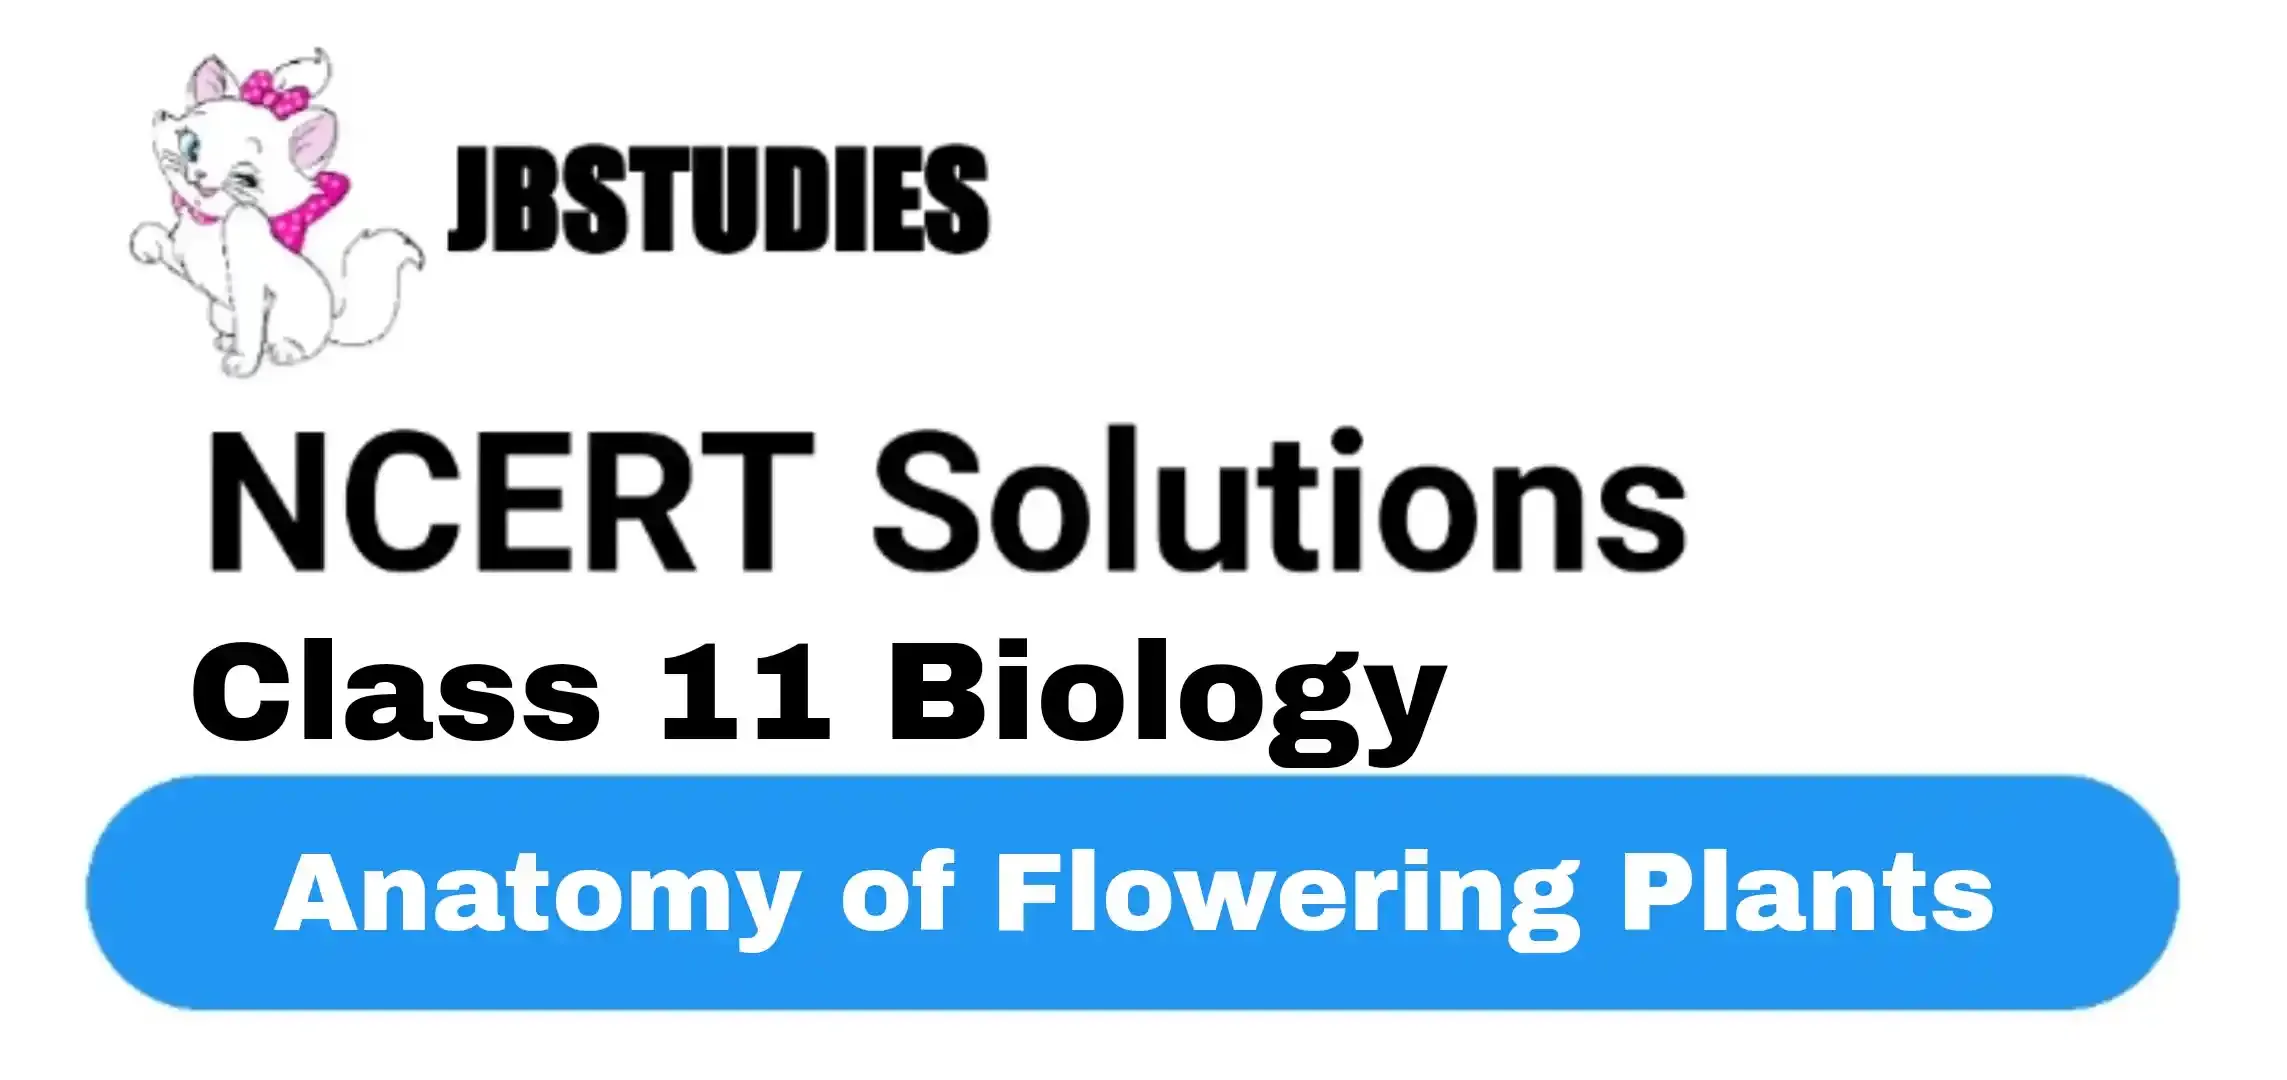 Solutions Class 11 Biology Chapter -6 (Anatomy of Flowering Plants)